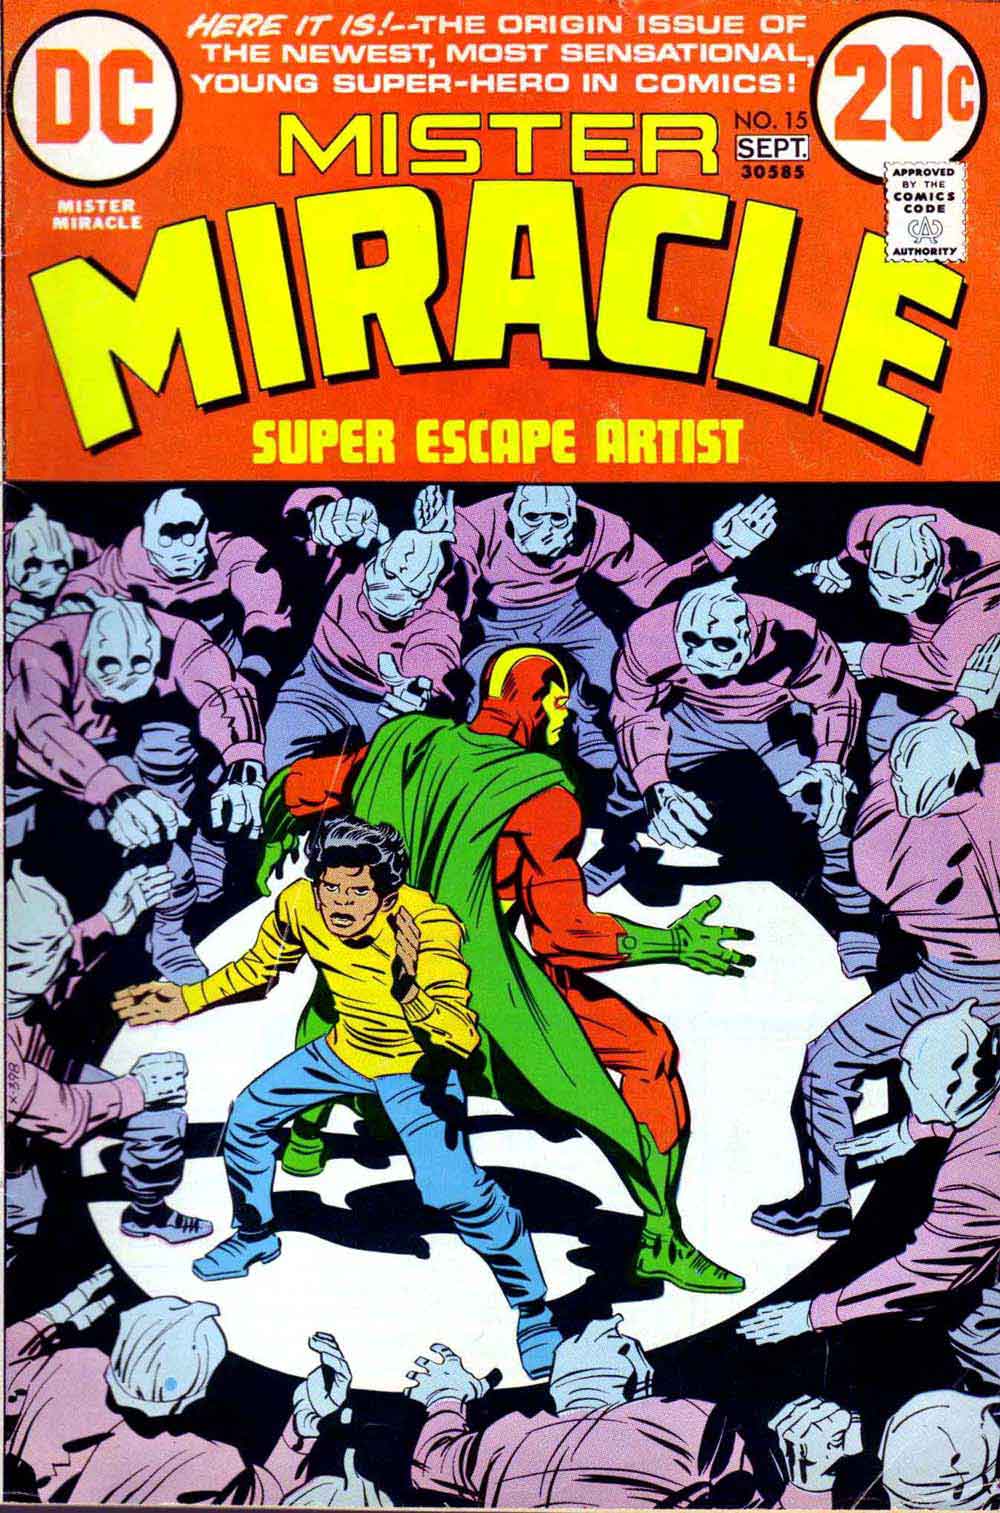 Mister Miracle v1 #15 dc bronze age comic book cover art by Jack Kirby